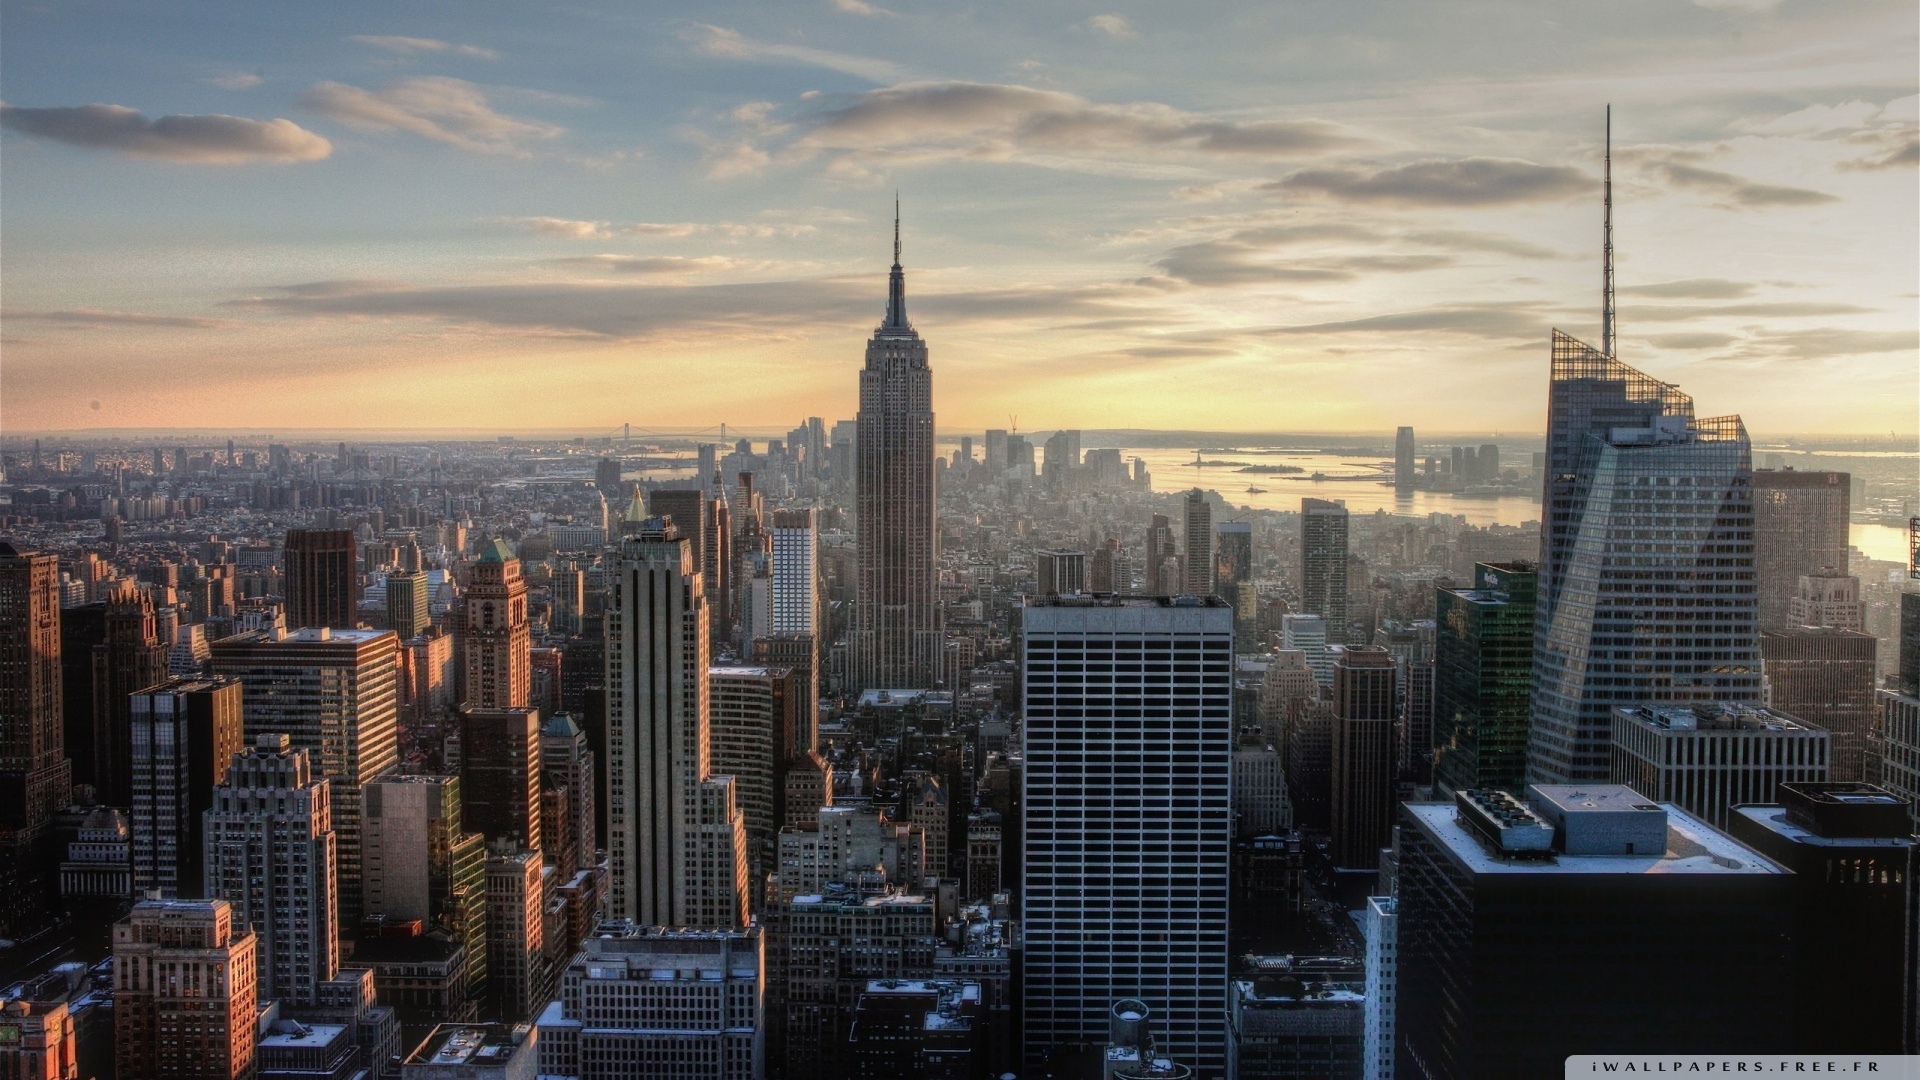 aerial_view_of_empire_state_building-wallpaper-1920x1080.jpg